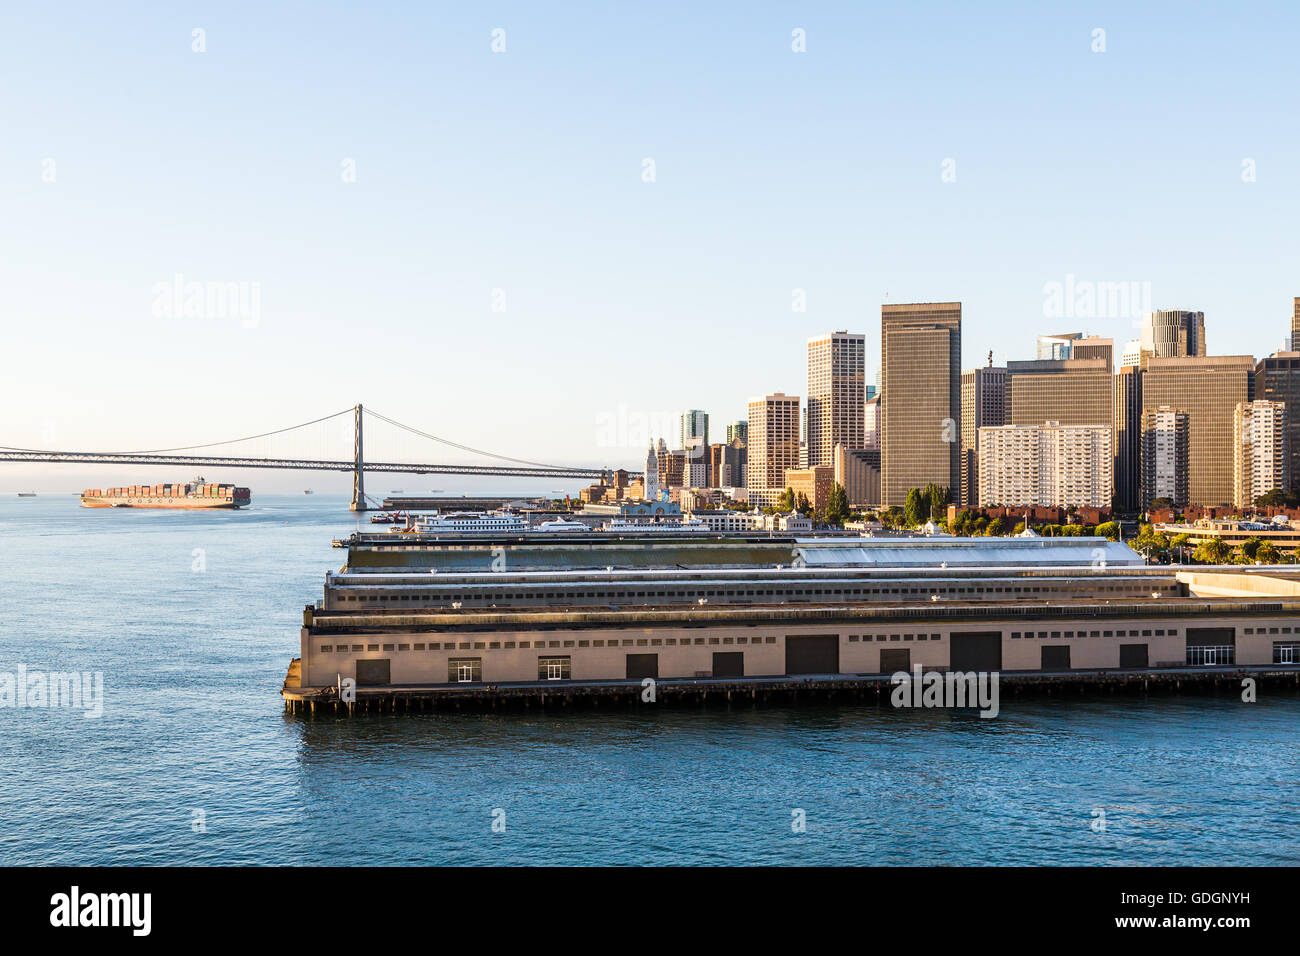 View of the coast of San Fransisco with piers, Bay Bridge and skyscrapers Stock Photo